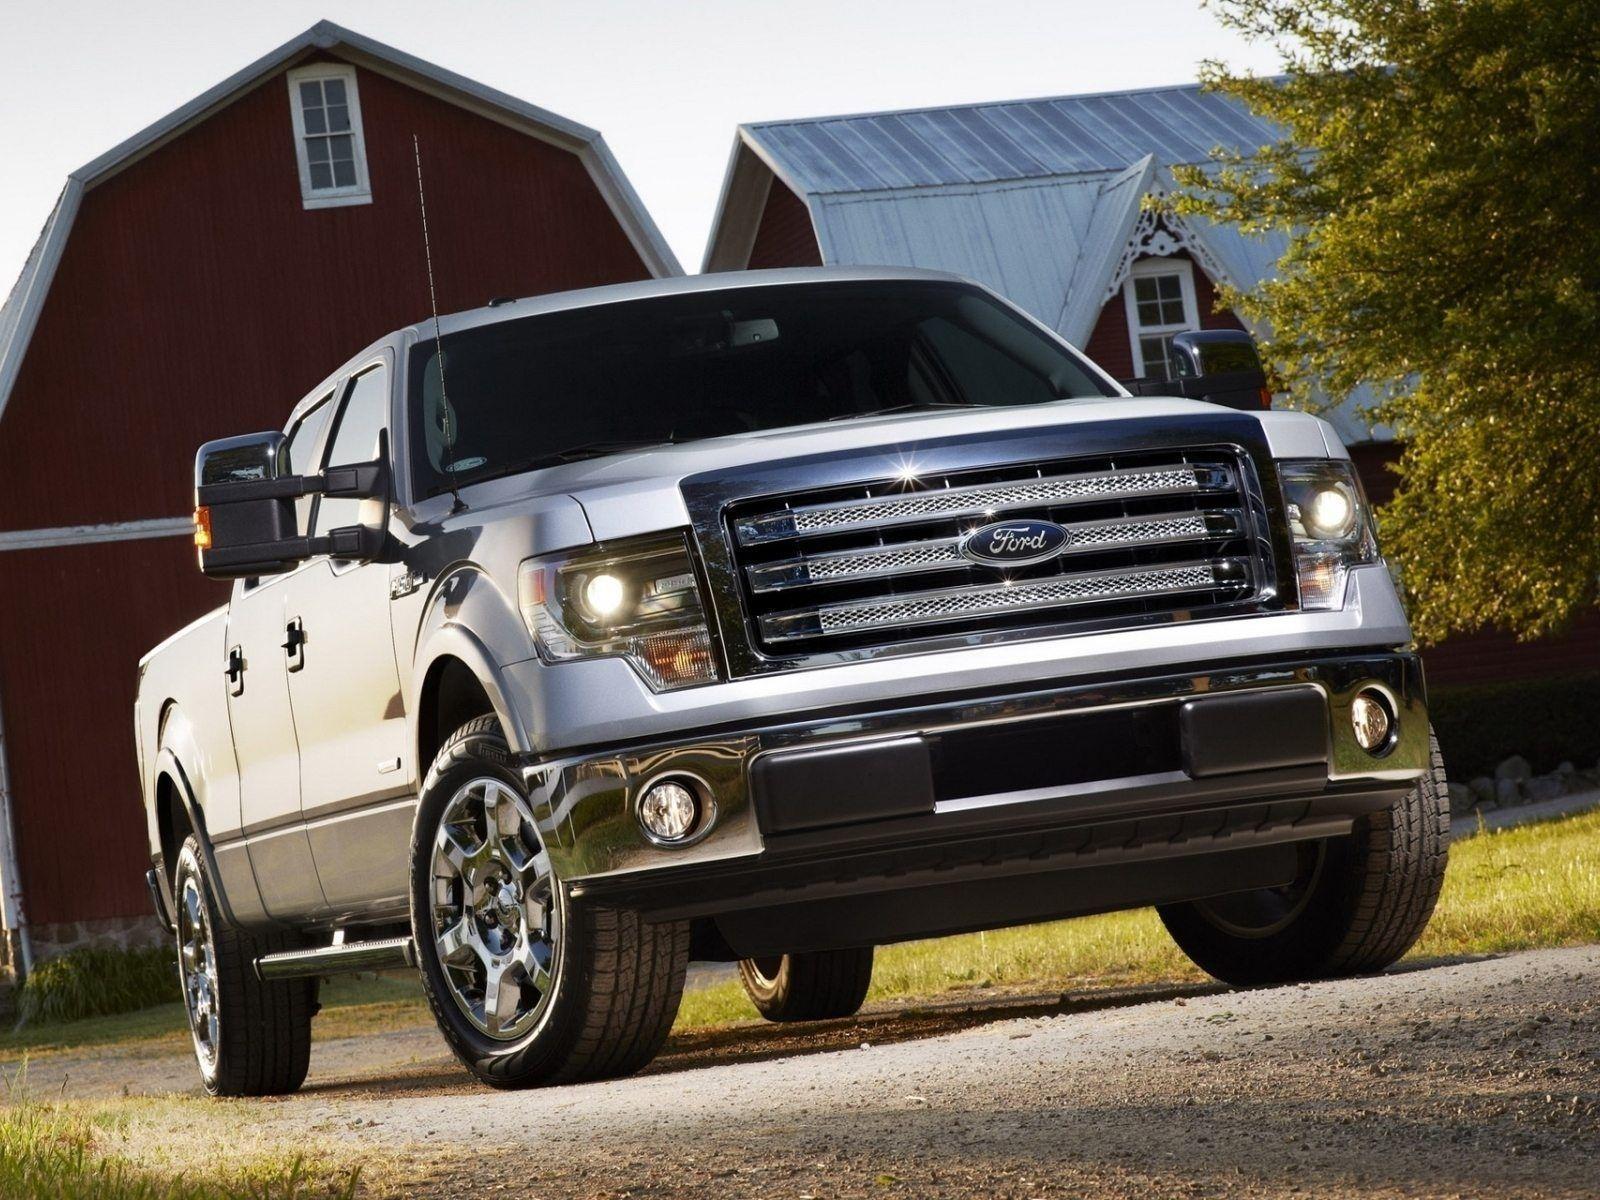 Gallery For > Ford Truck Wallpaper